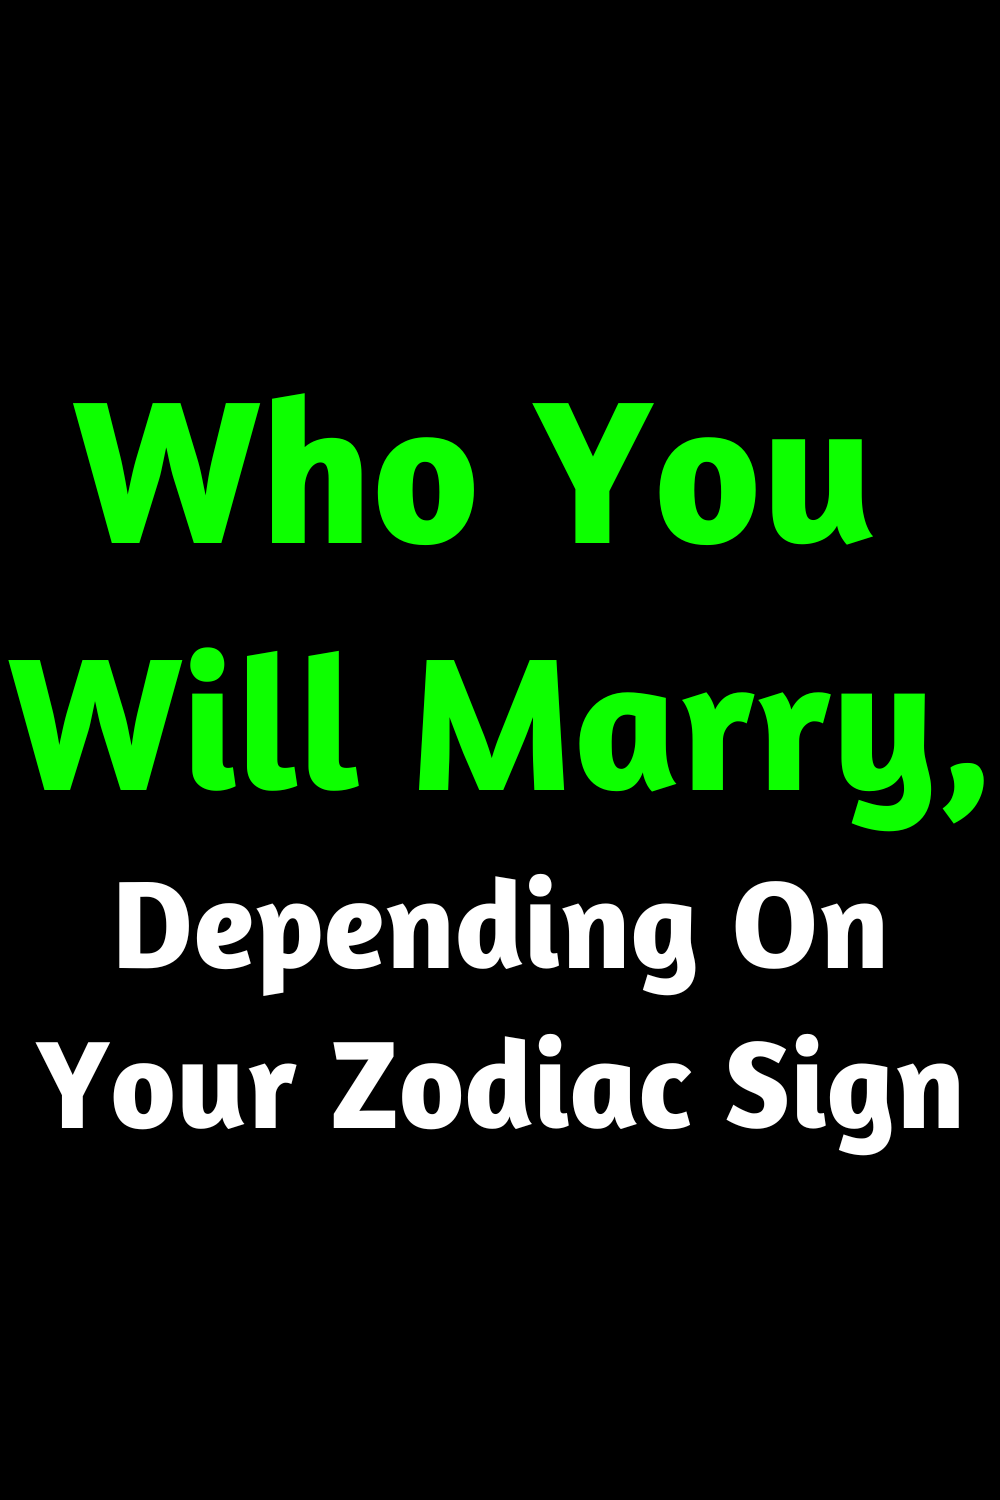 Who You Will Marry, Depending On Your Zodiac Sign